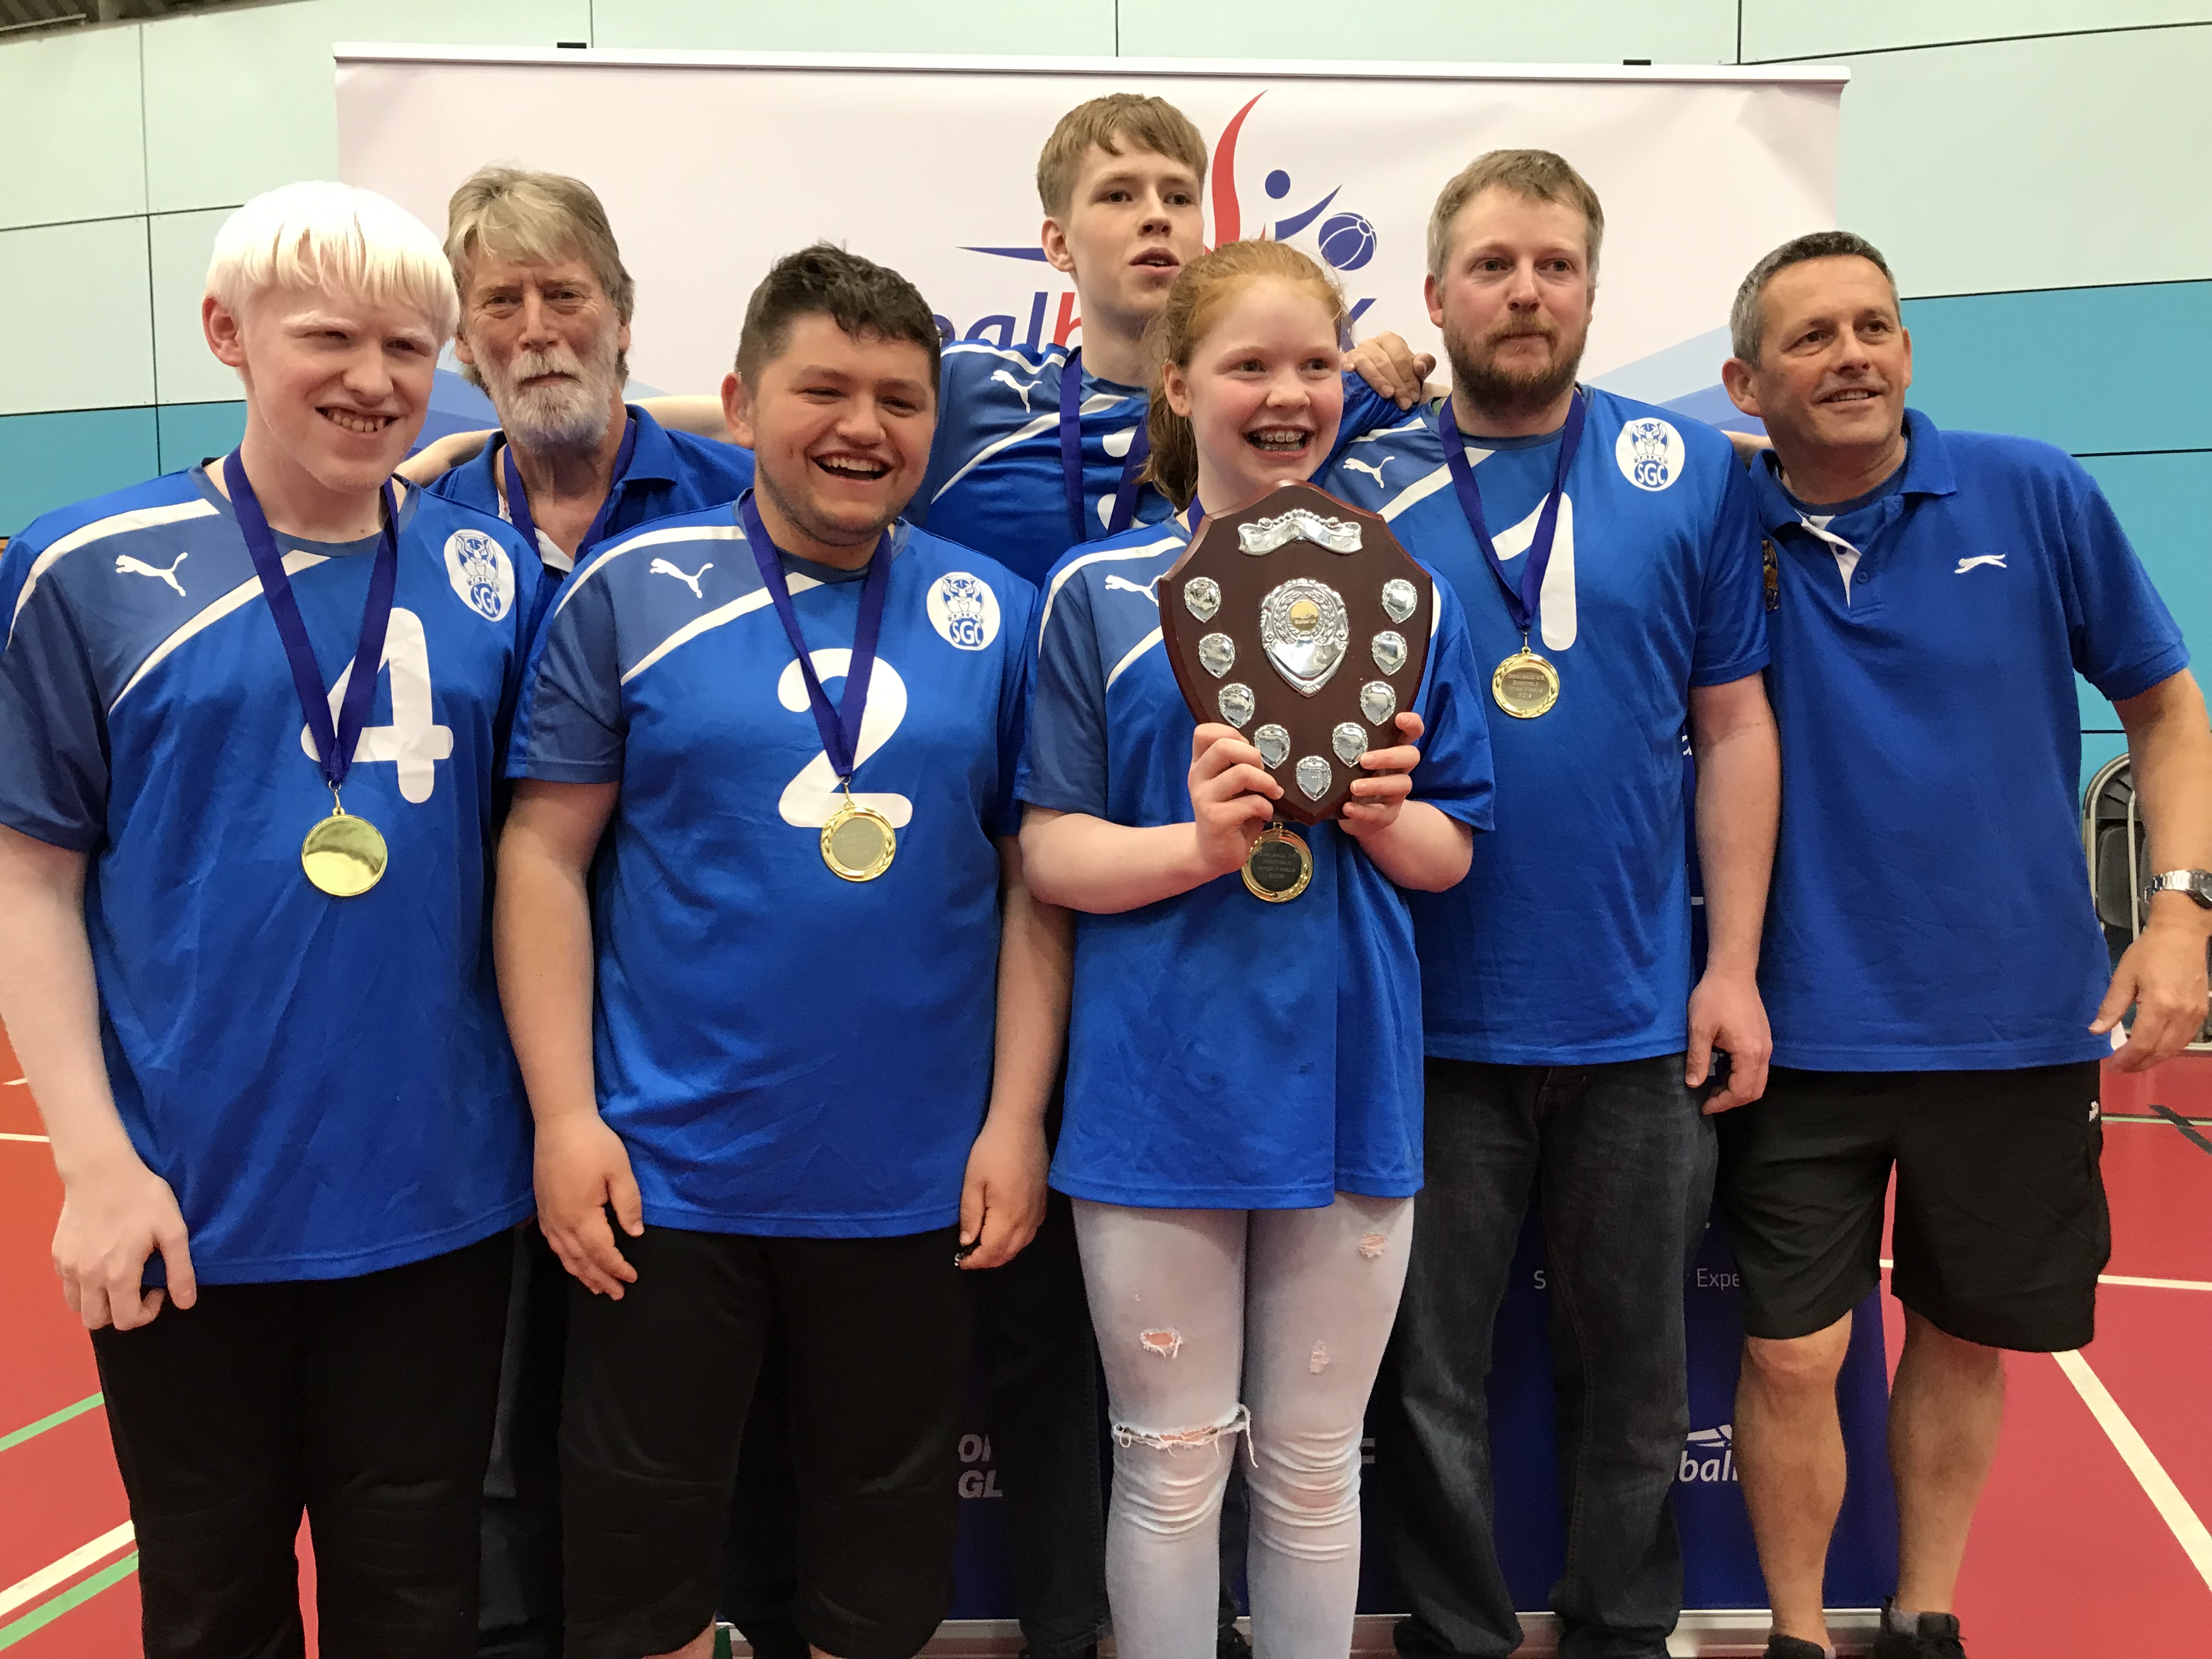 Photo of Scarborough sporting their medals at the end of an Intermediate tournament